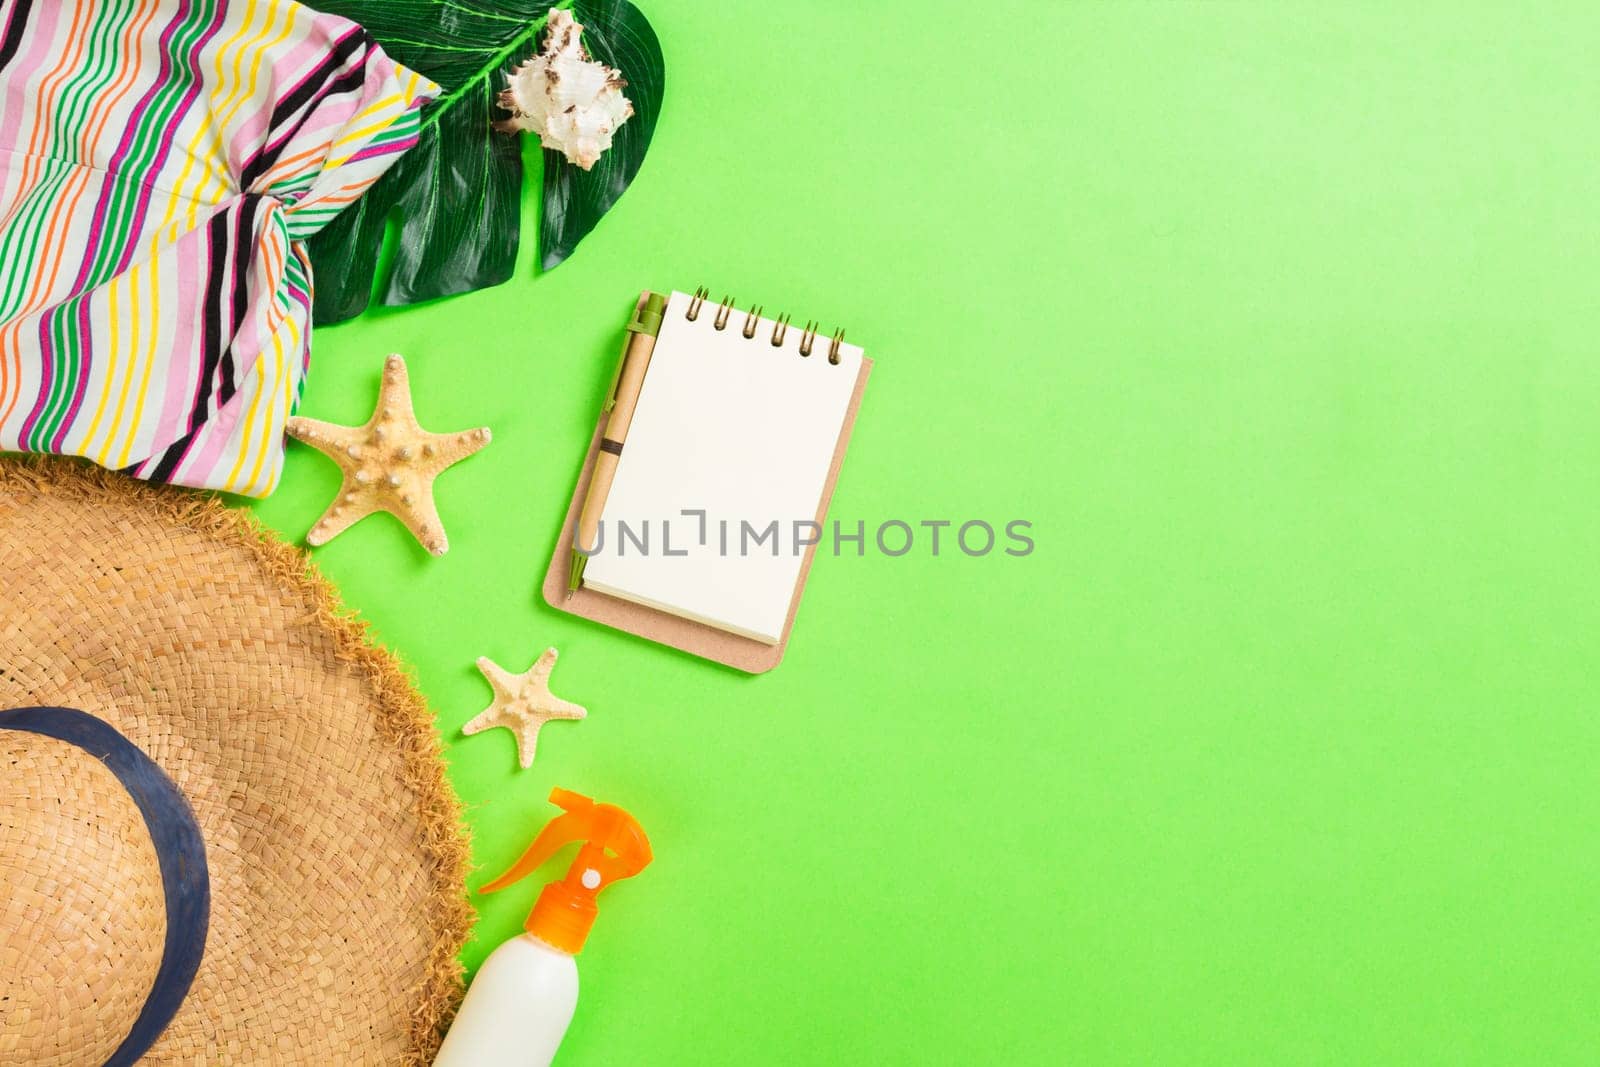 Summer accessories with t-shirt, seashells, flip flops sunscreen bottle and straw hat on green background top view flat lay.